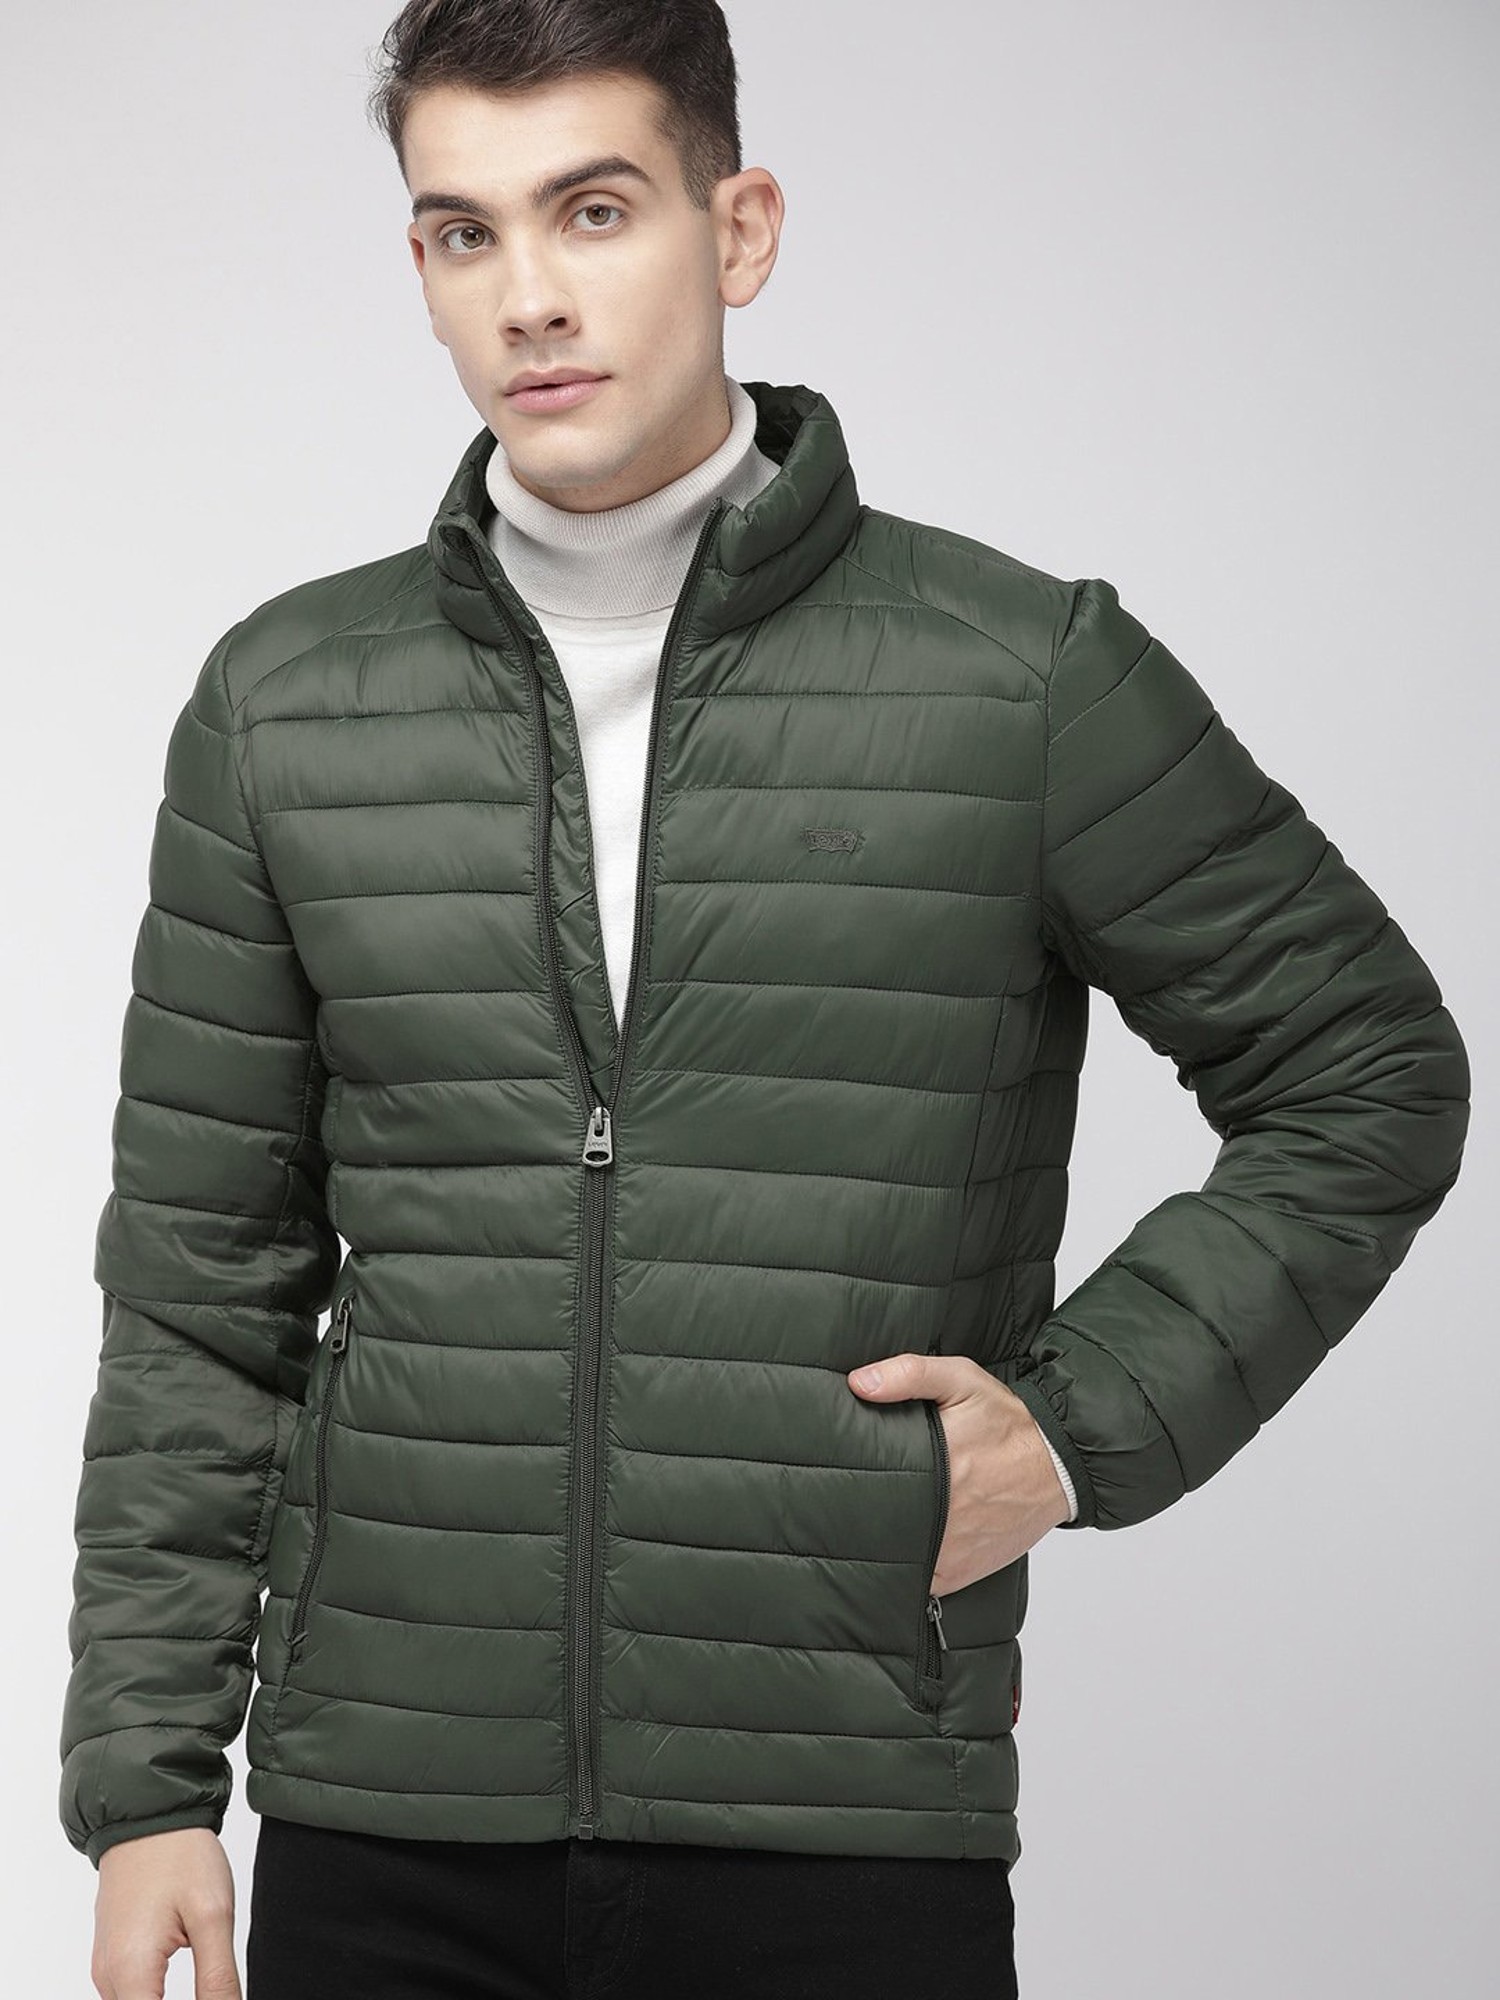 Buy Levi'S Green Quilted Jacket for Mens Online @ Tata CLiQ